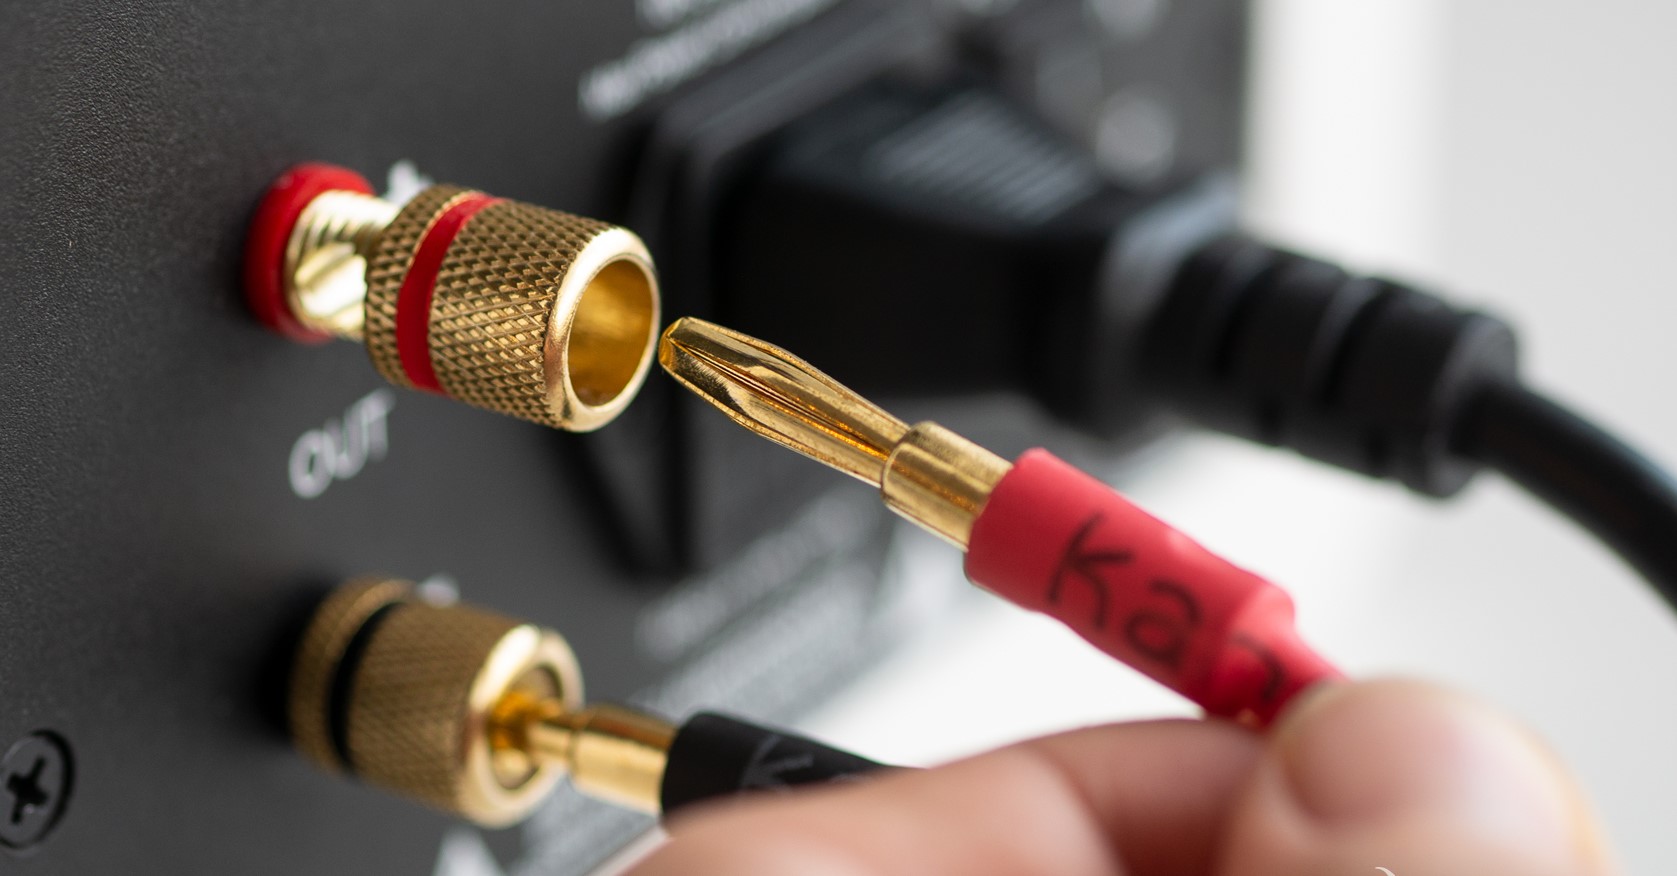 How To Choose And Install Speaker Wire Connectors